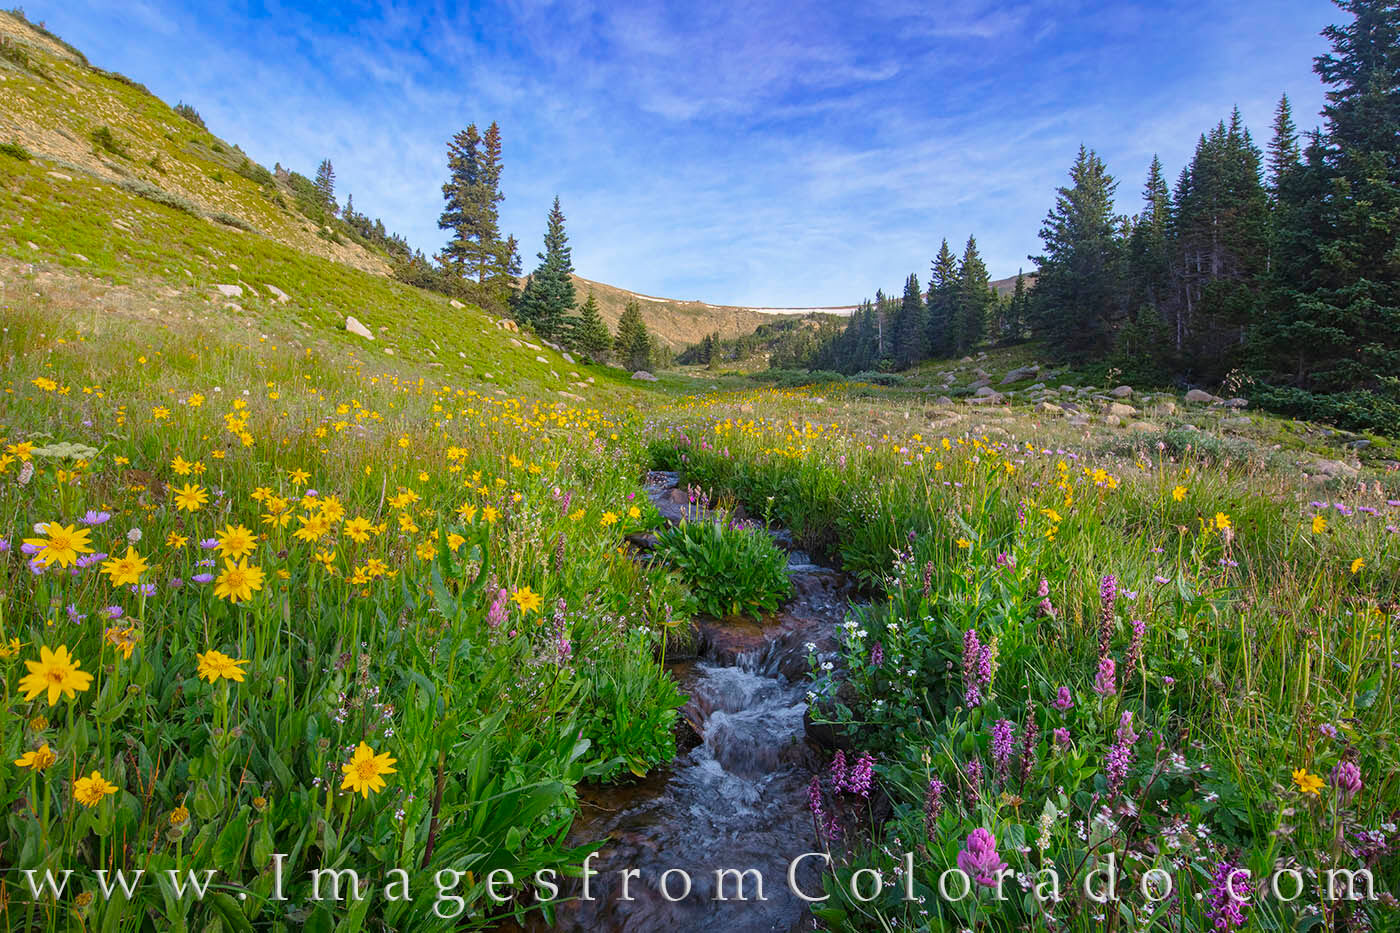 High up on Berthoud Pass, a lonely stream flows down the slopes from late summer melting snow. With the help of Googlemaps and...